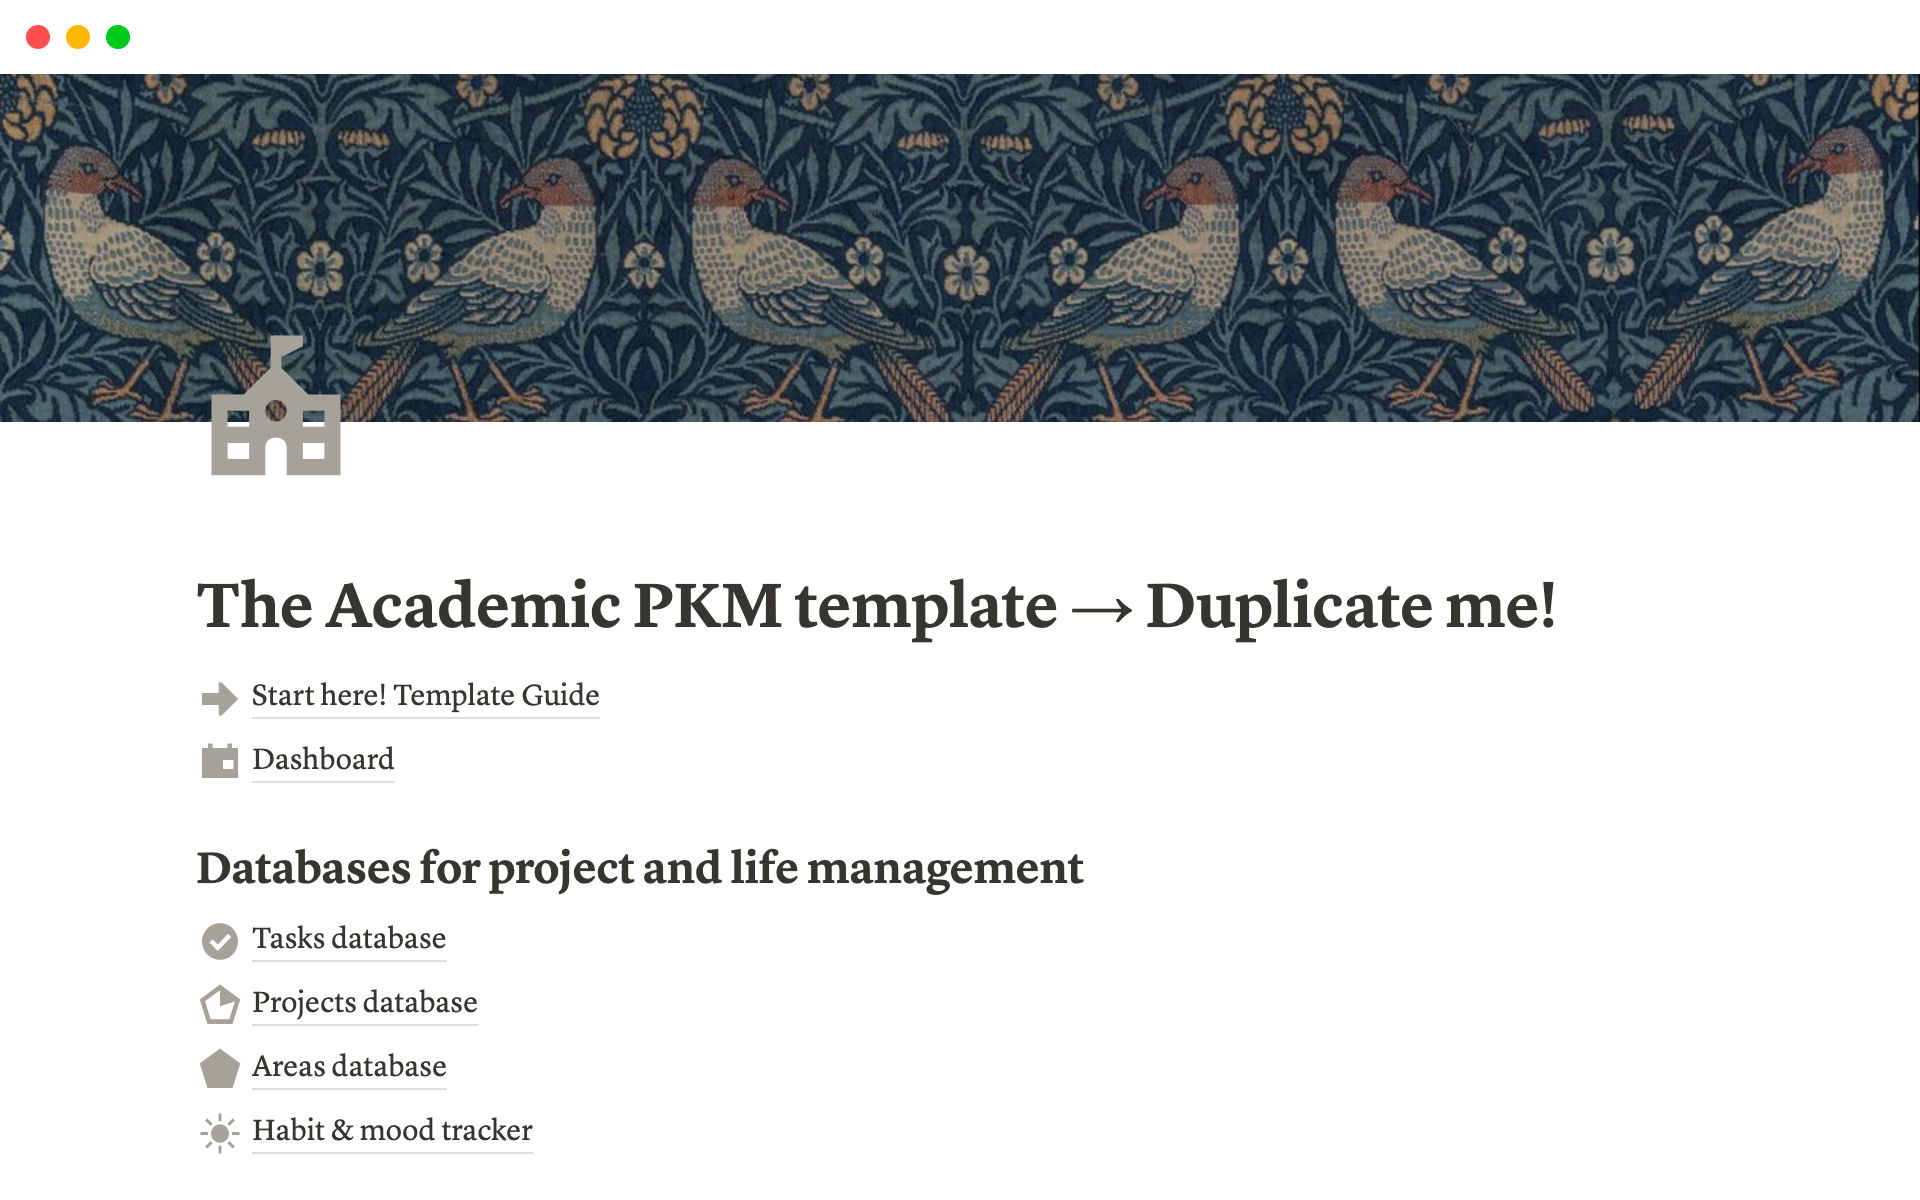 This template is a comprehensive system that combines both project and knowledge management, and is designed to support a wide range of academic activities, including research, teaching, and learning.